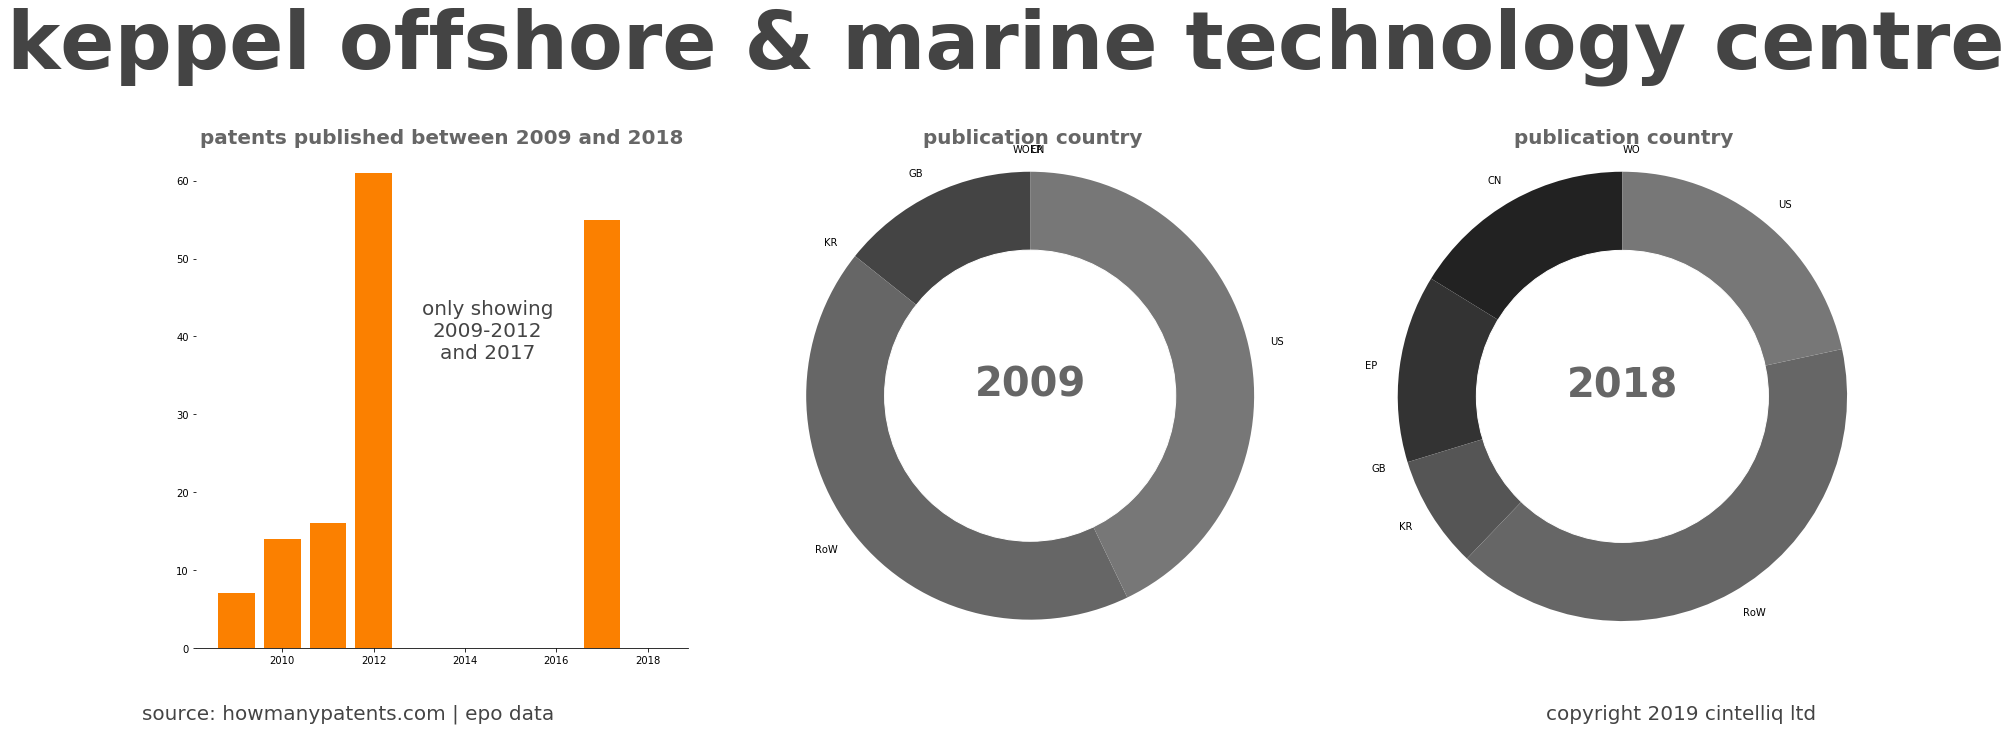 summary of patents for Keppel Offshore & Marine Technology Centre